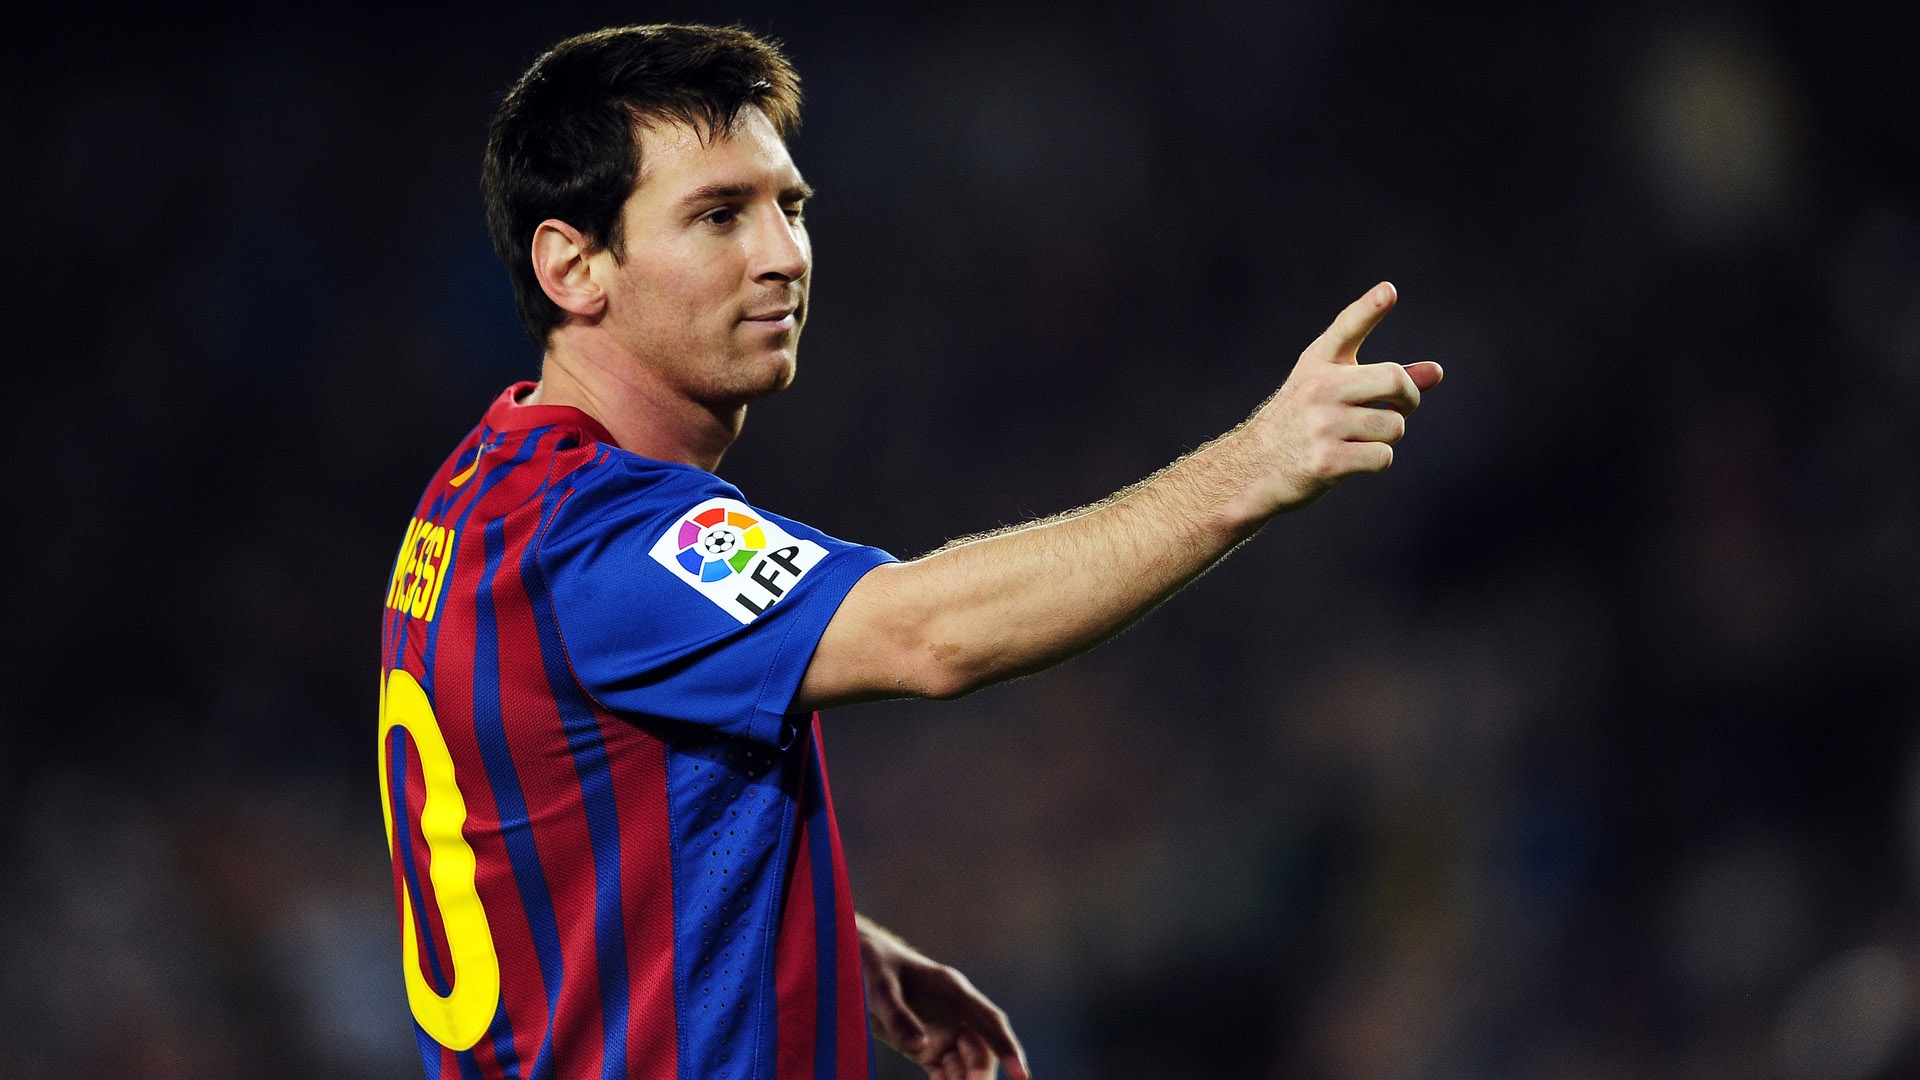  Download 40 Lionel Messi HD Wallpapers 1920x1080